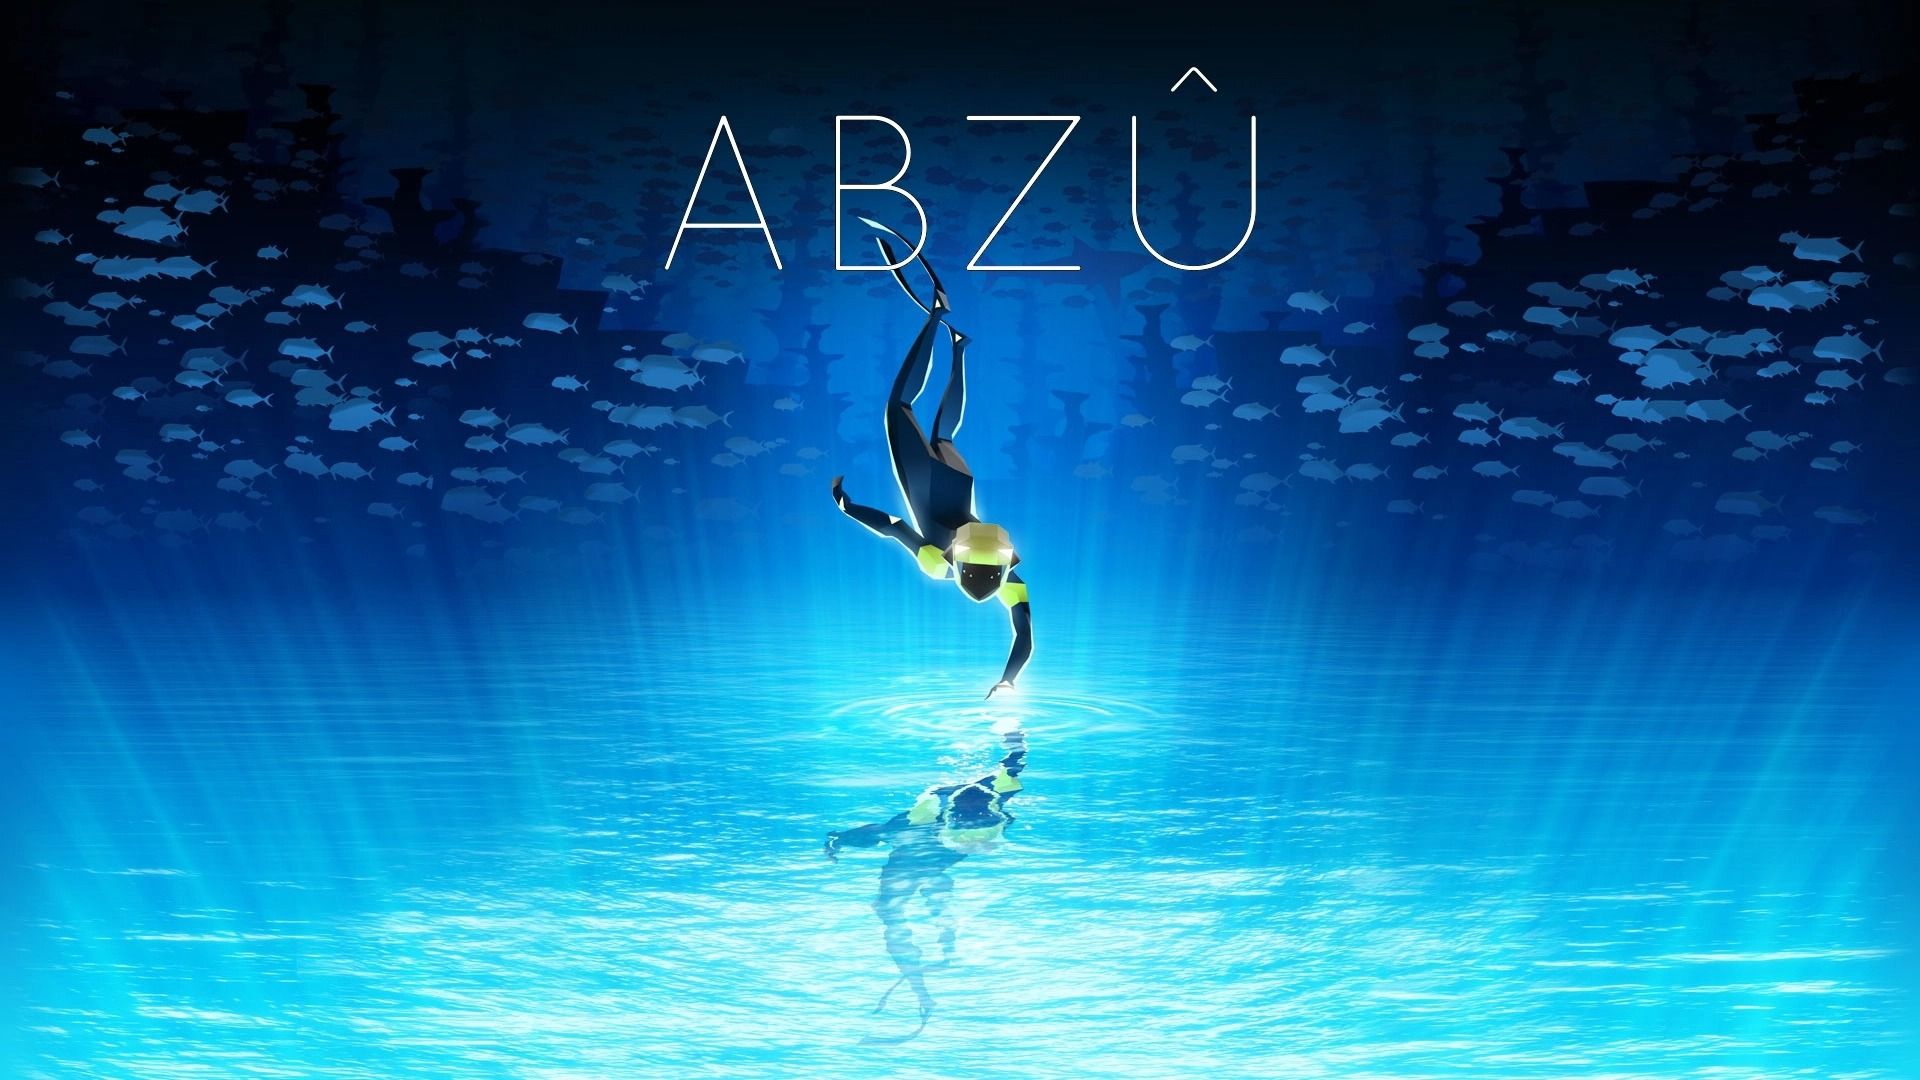 the cover of Abzû